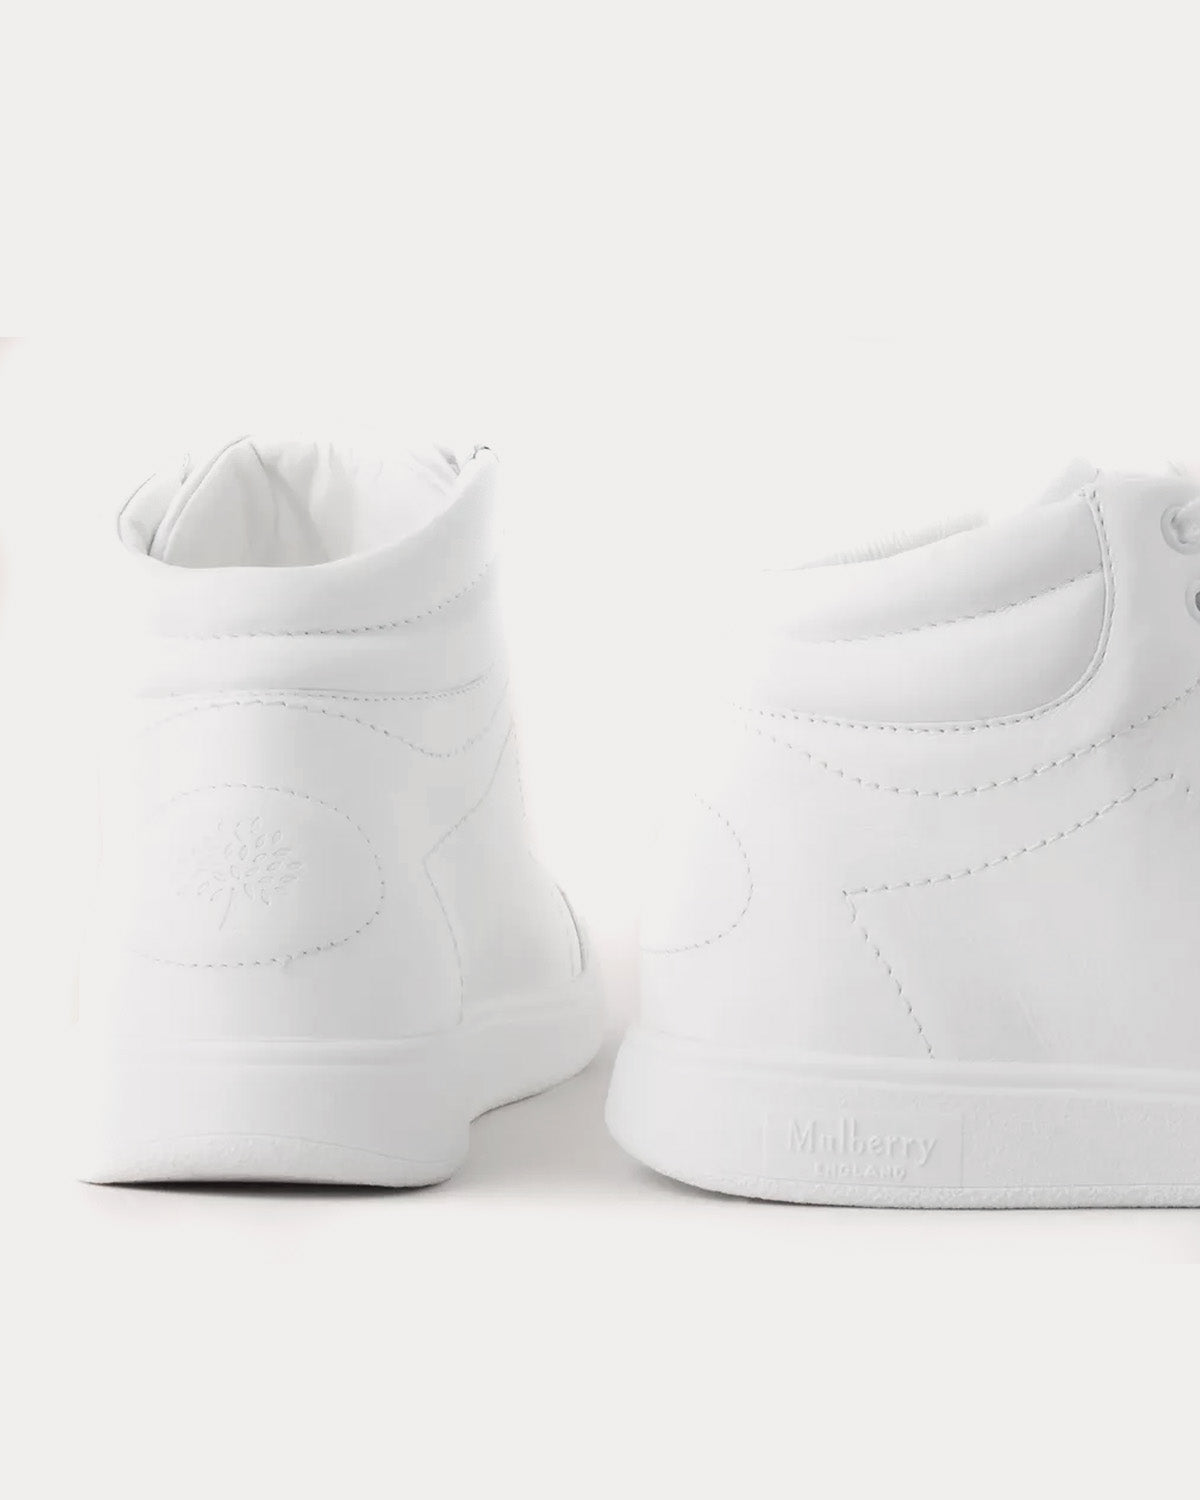 Mulberry - Leather White High Top Sneakers